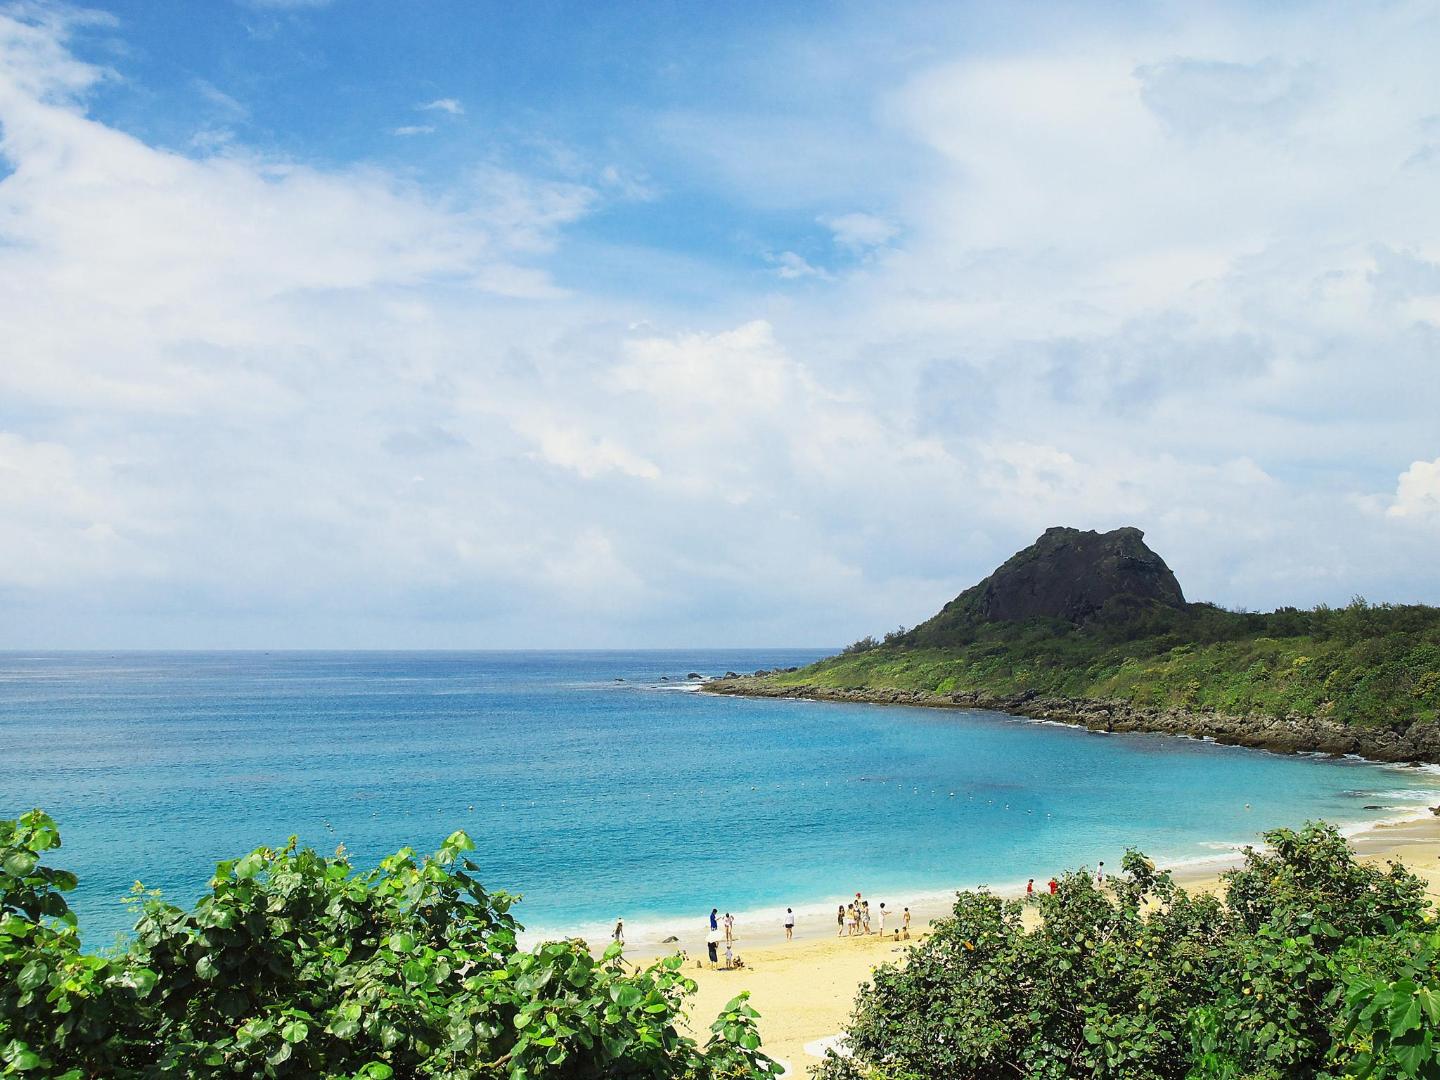 What are the best Strand hotels in Kenting?